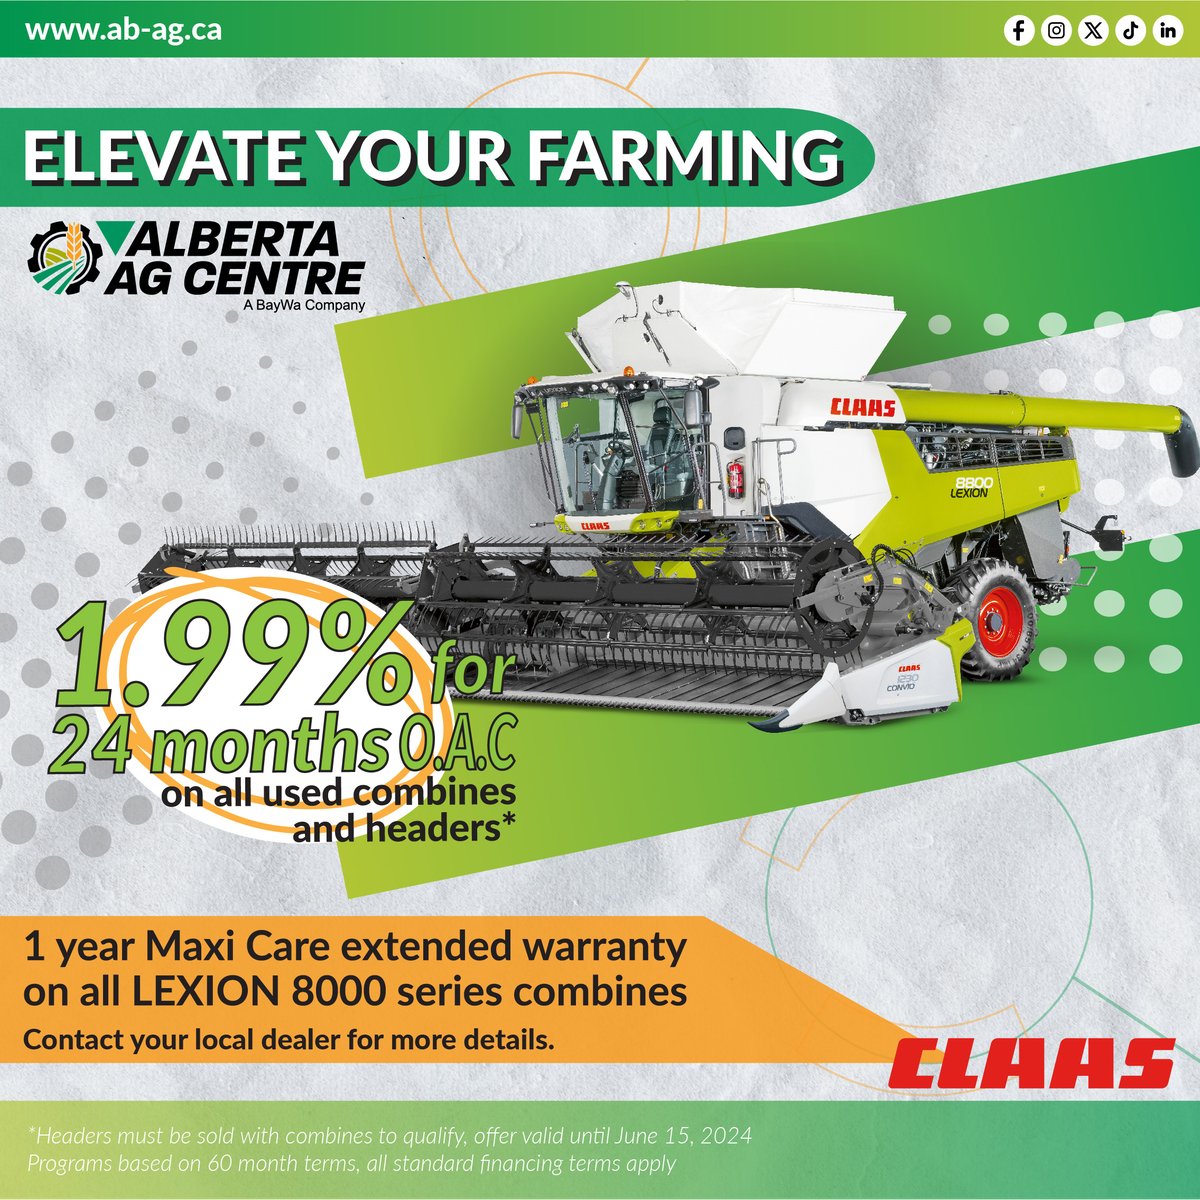 Don't miss out on the chance to elevate your farming game with industry-leading efficiency and technology! Contact your local dealer for more details!

#CLAAS #AlbertaAGCentre #combines #usedcombines #springsale #springsavings #farming #agriculture